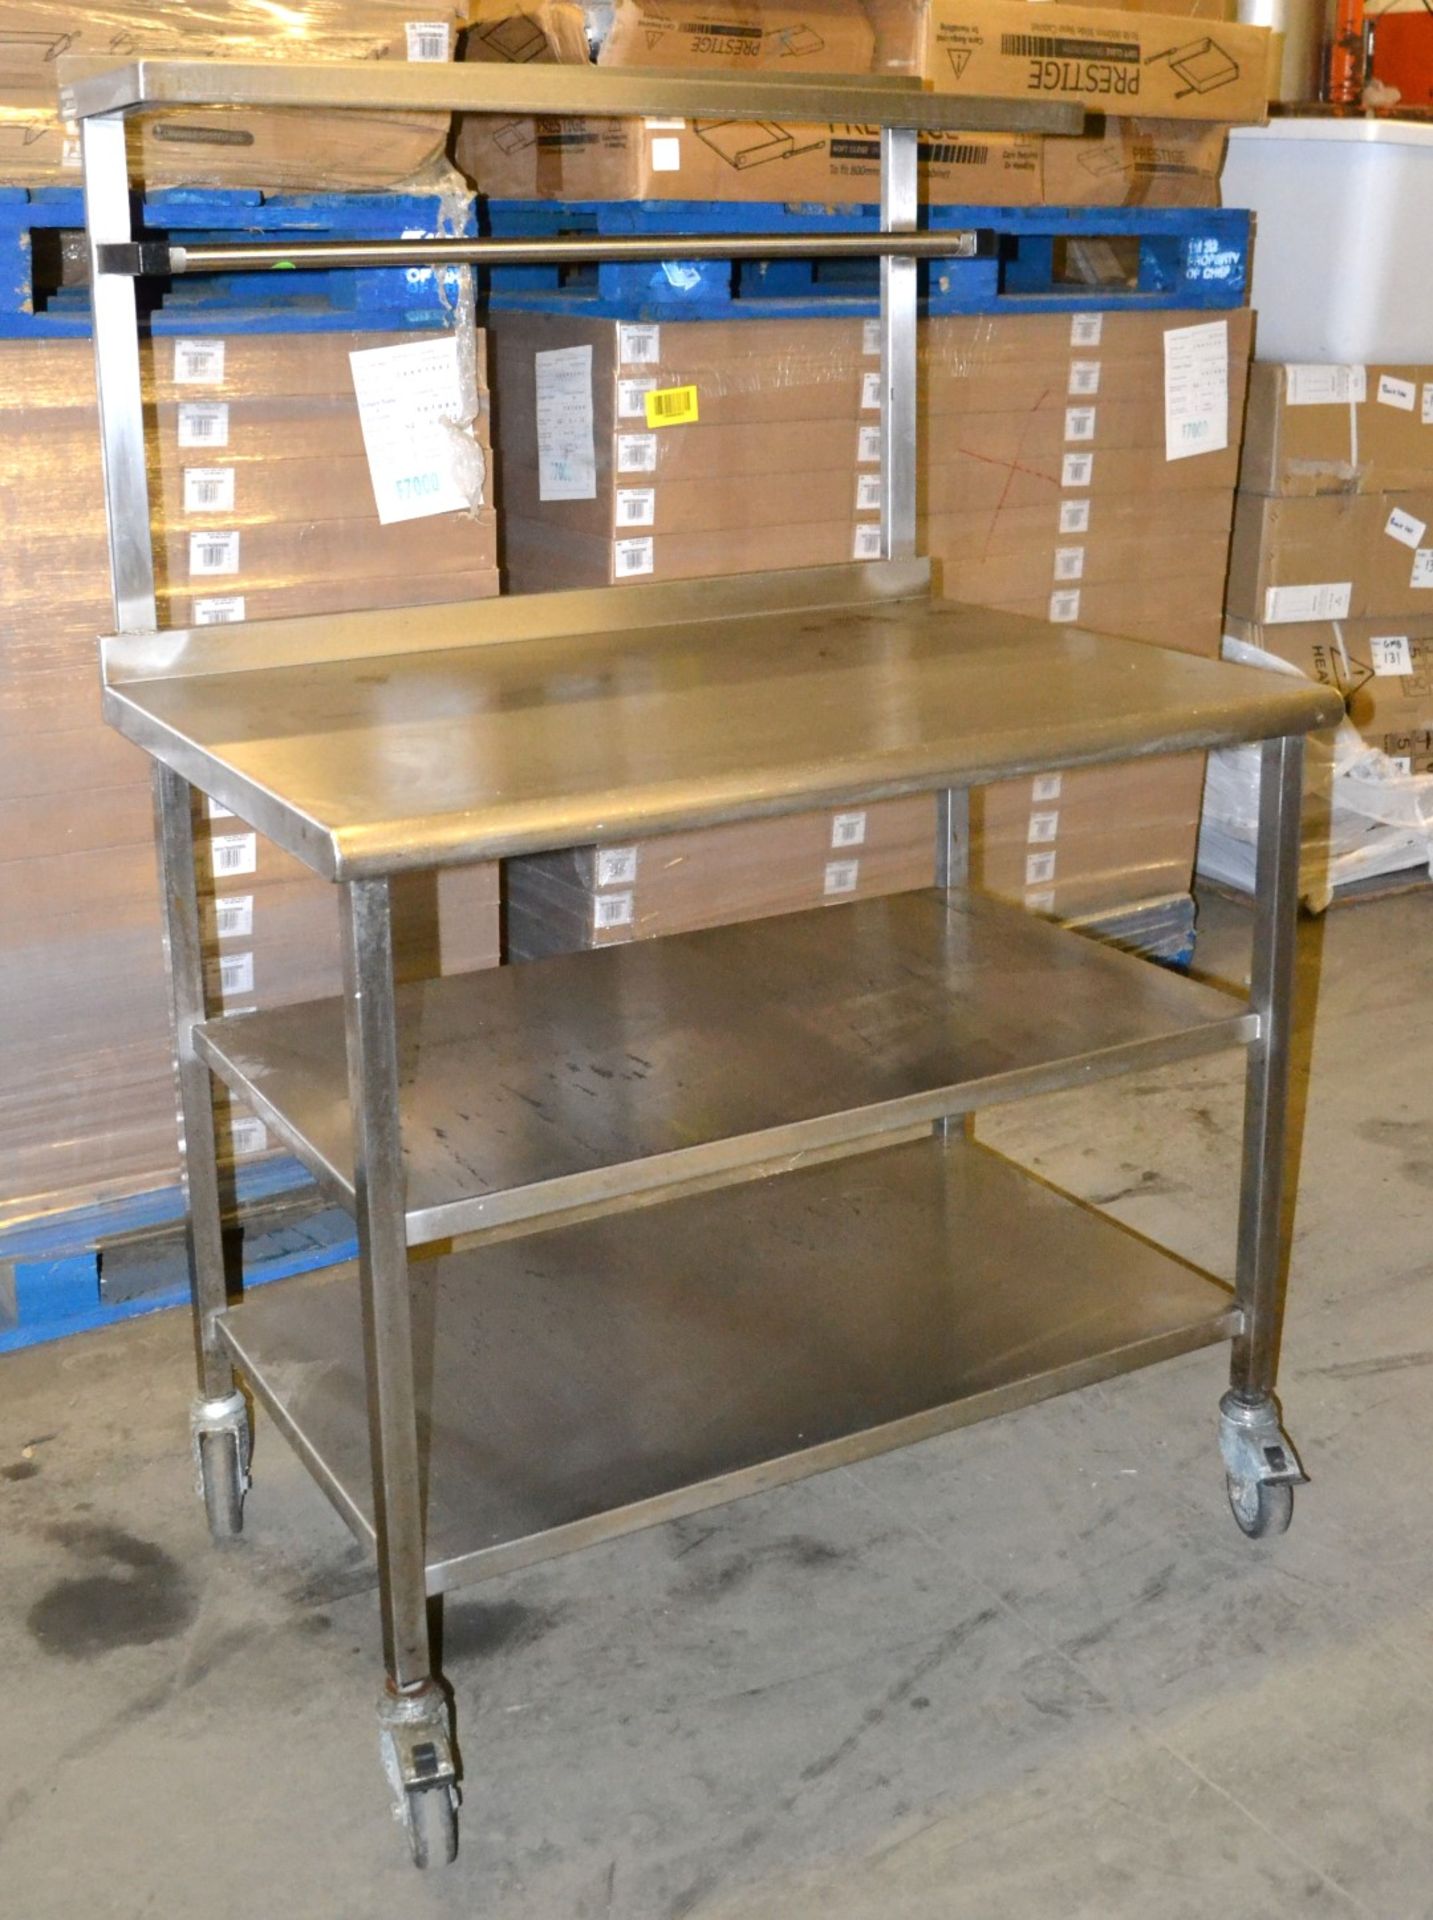 1 x Wheeled Stainless Steel Prep Table - Dimensions: 100 x 69.5 x 148cm - Ref: MC120 - CL282 - Locat - Image 2 of 11